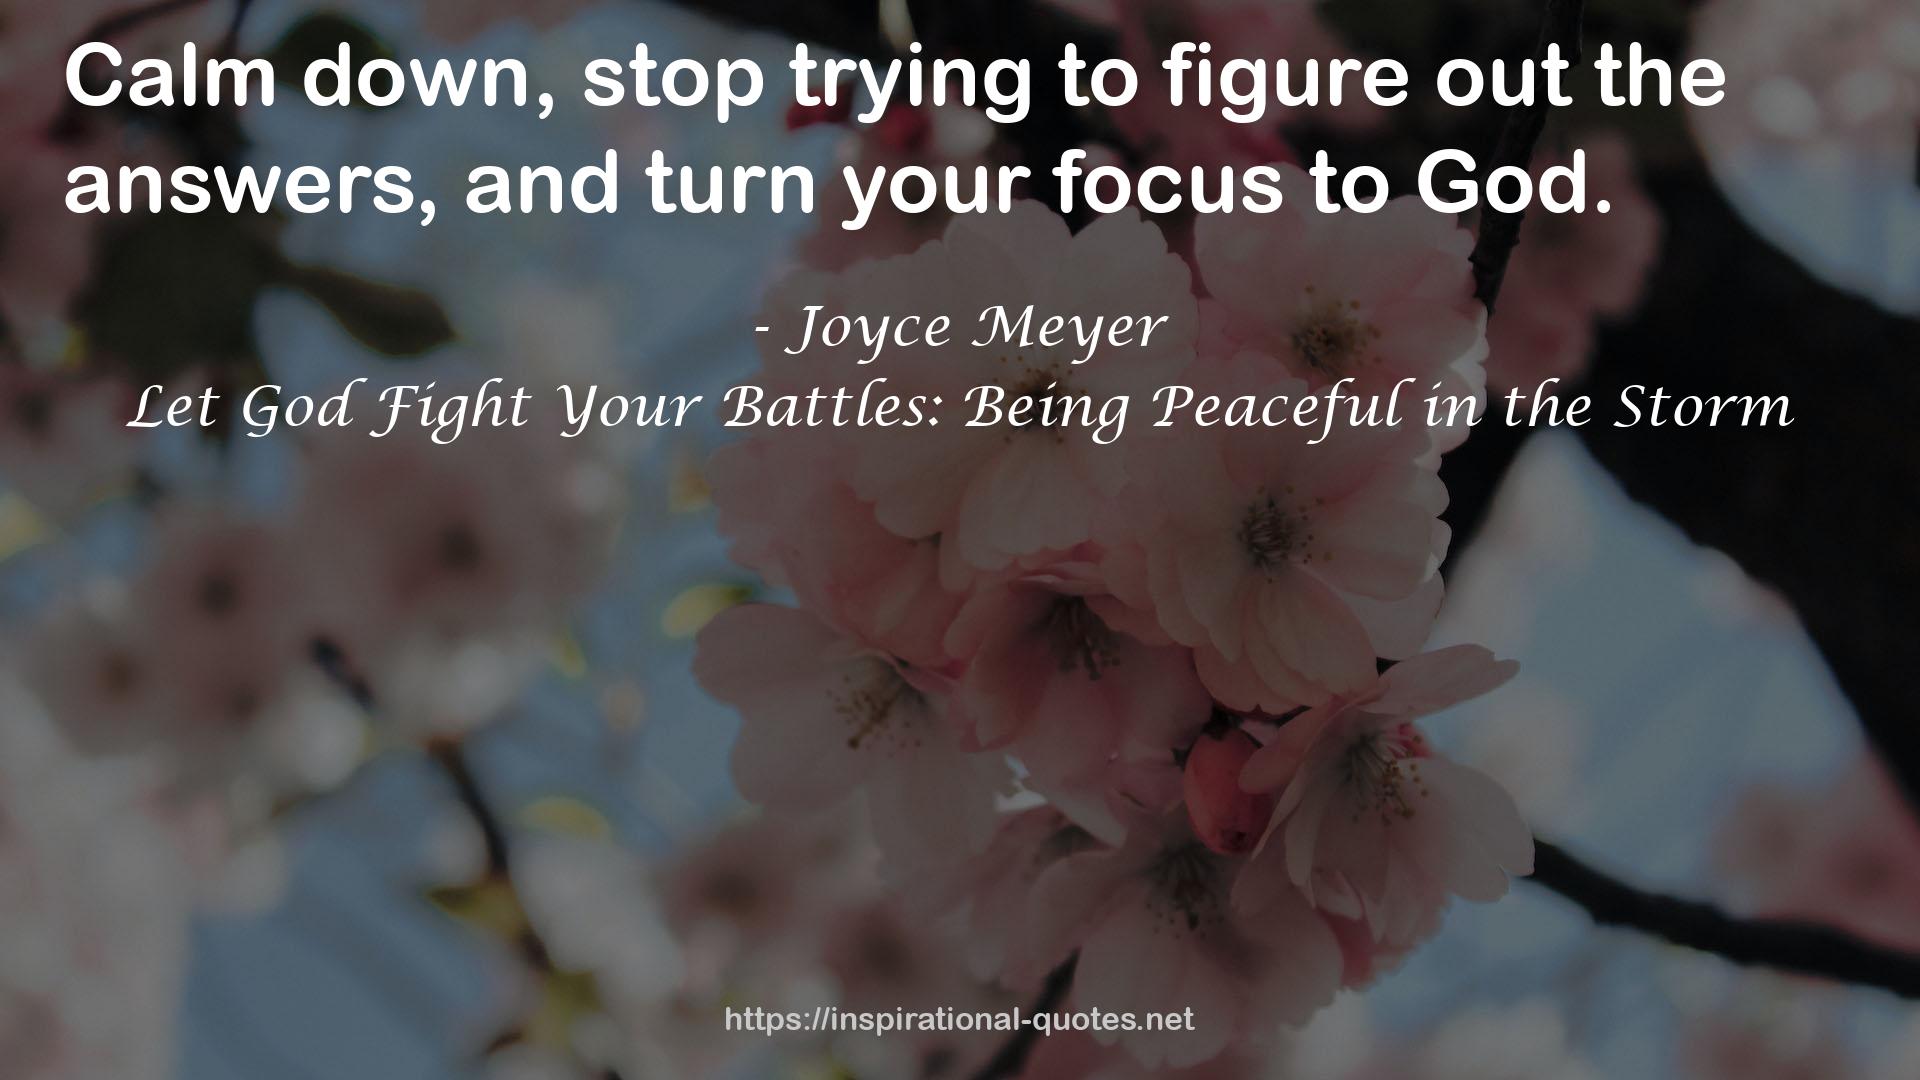 Let God Fight Your Battles: Being Peaceful in the Storm QUOTES